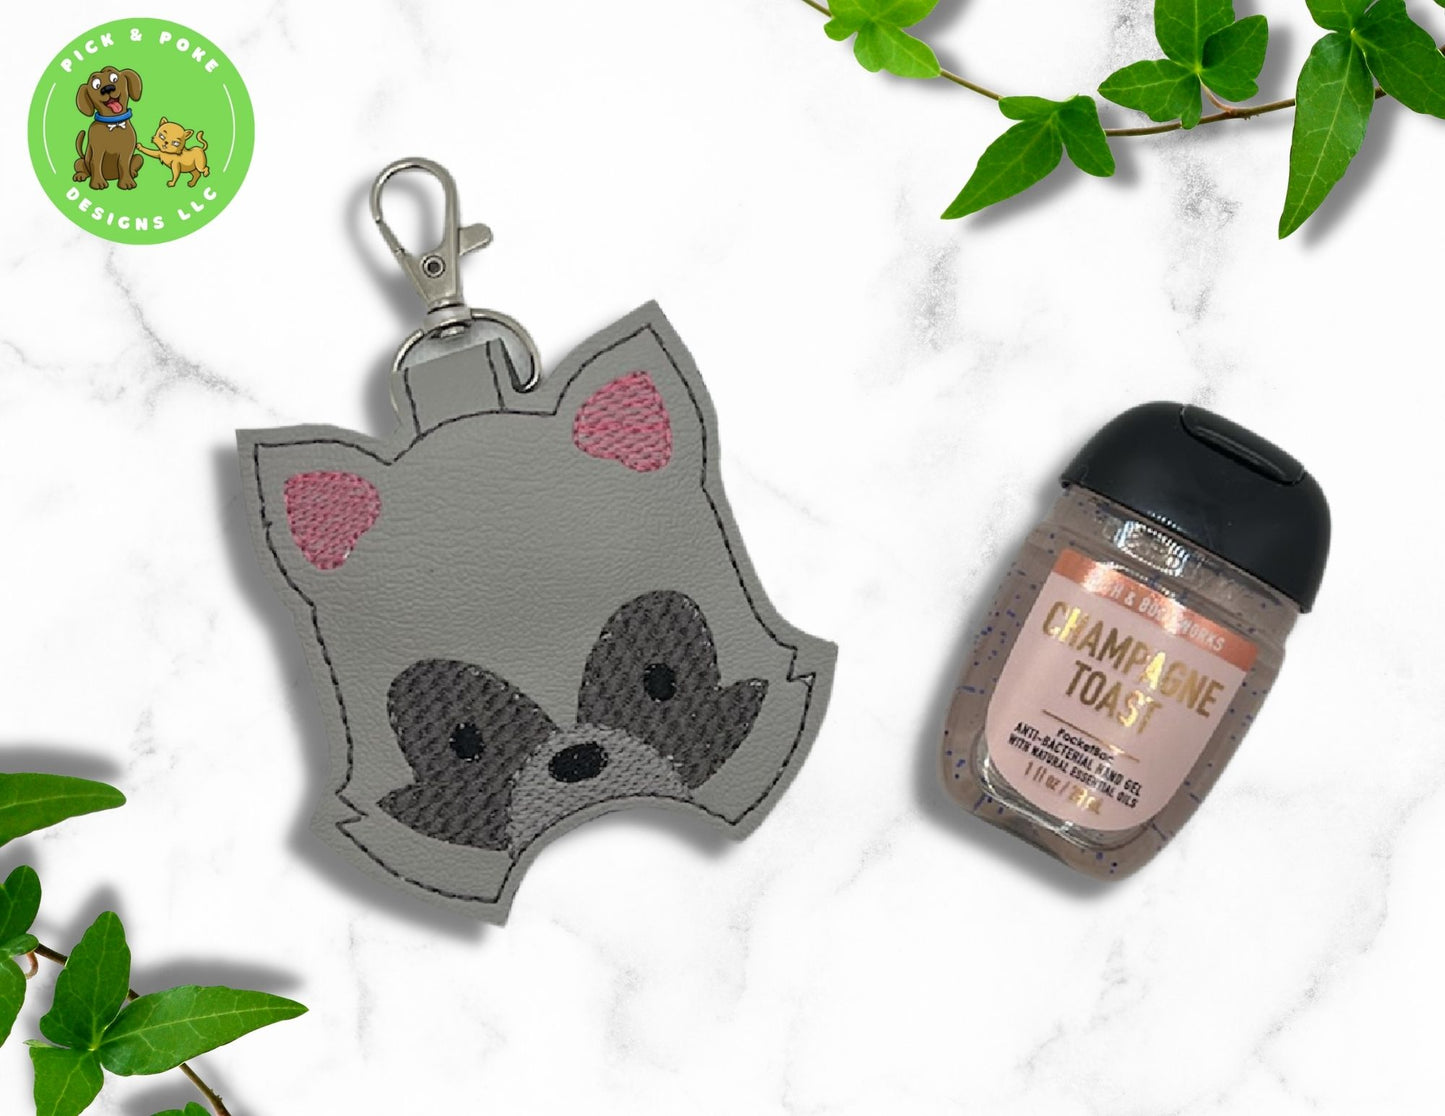 Raccoon Trash Panda Sanitizer Holder Key Chain | Embroidered on Vinyl | Made to Order